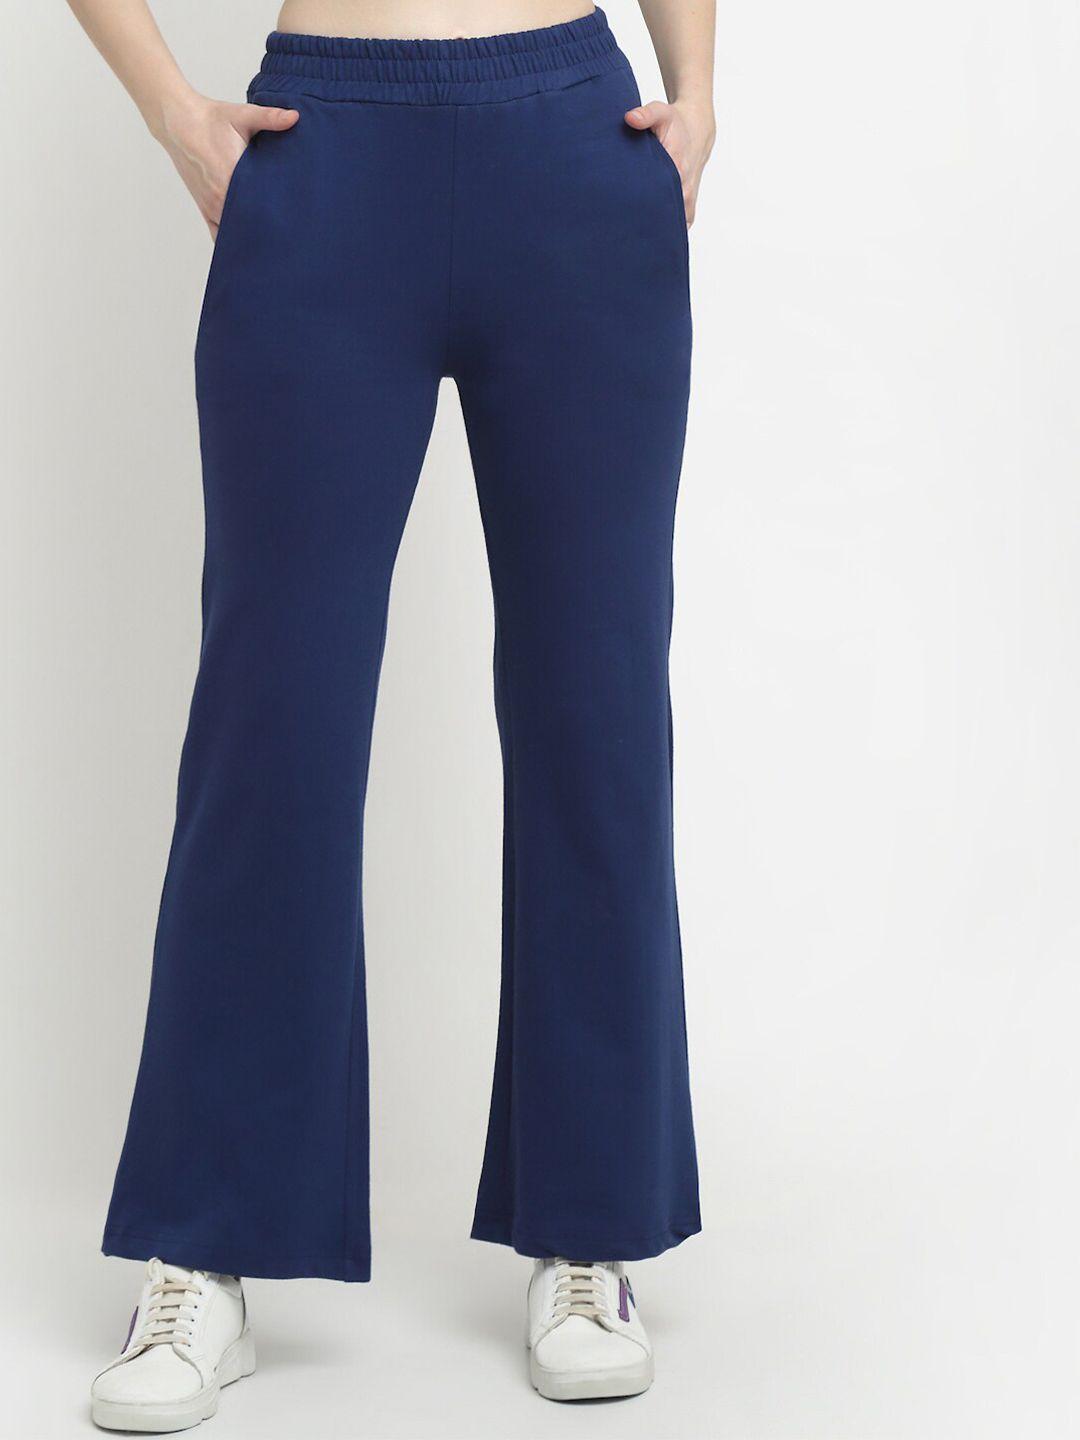 everdion-women-navy-blue-solid-relaxed-fit-flared-pure-cotton-track-pant